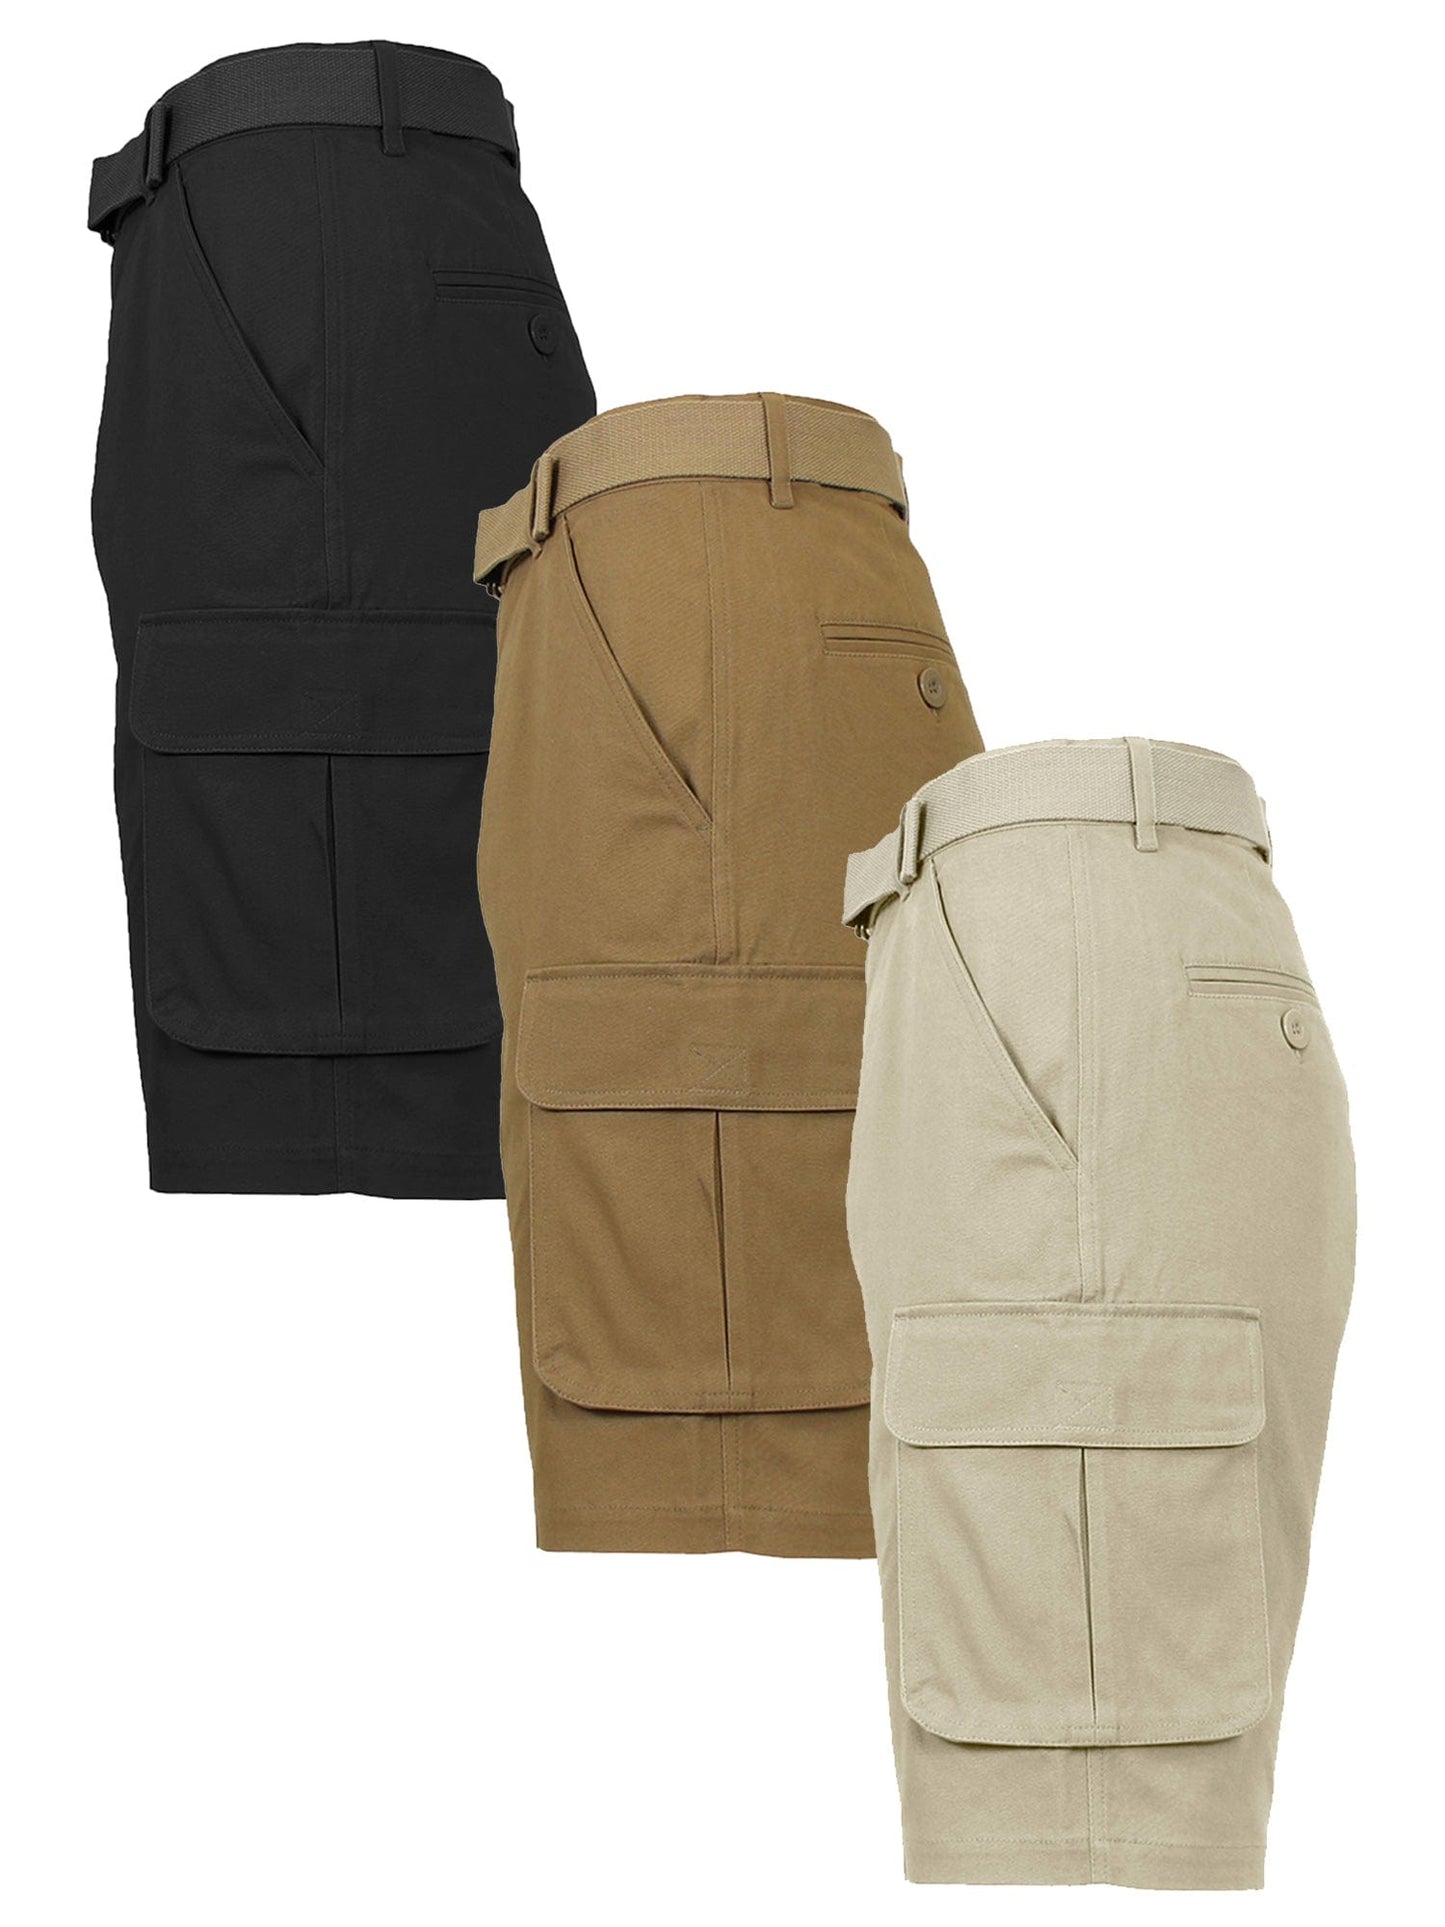 Men's [3-PACK] Cotton Flex Stretch Cargo Shorts with Belt - GalaxybyHarvic